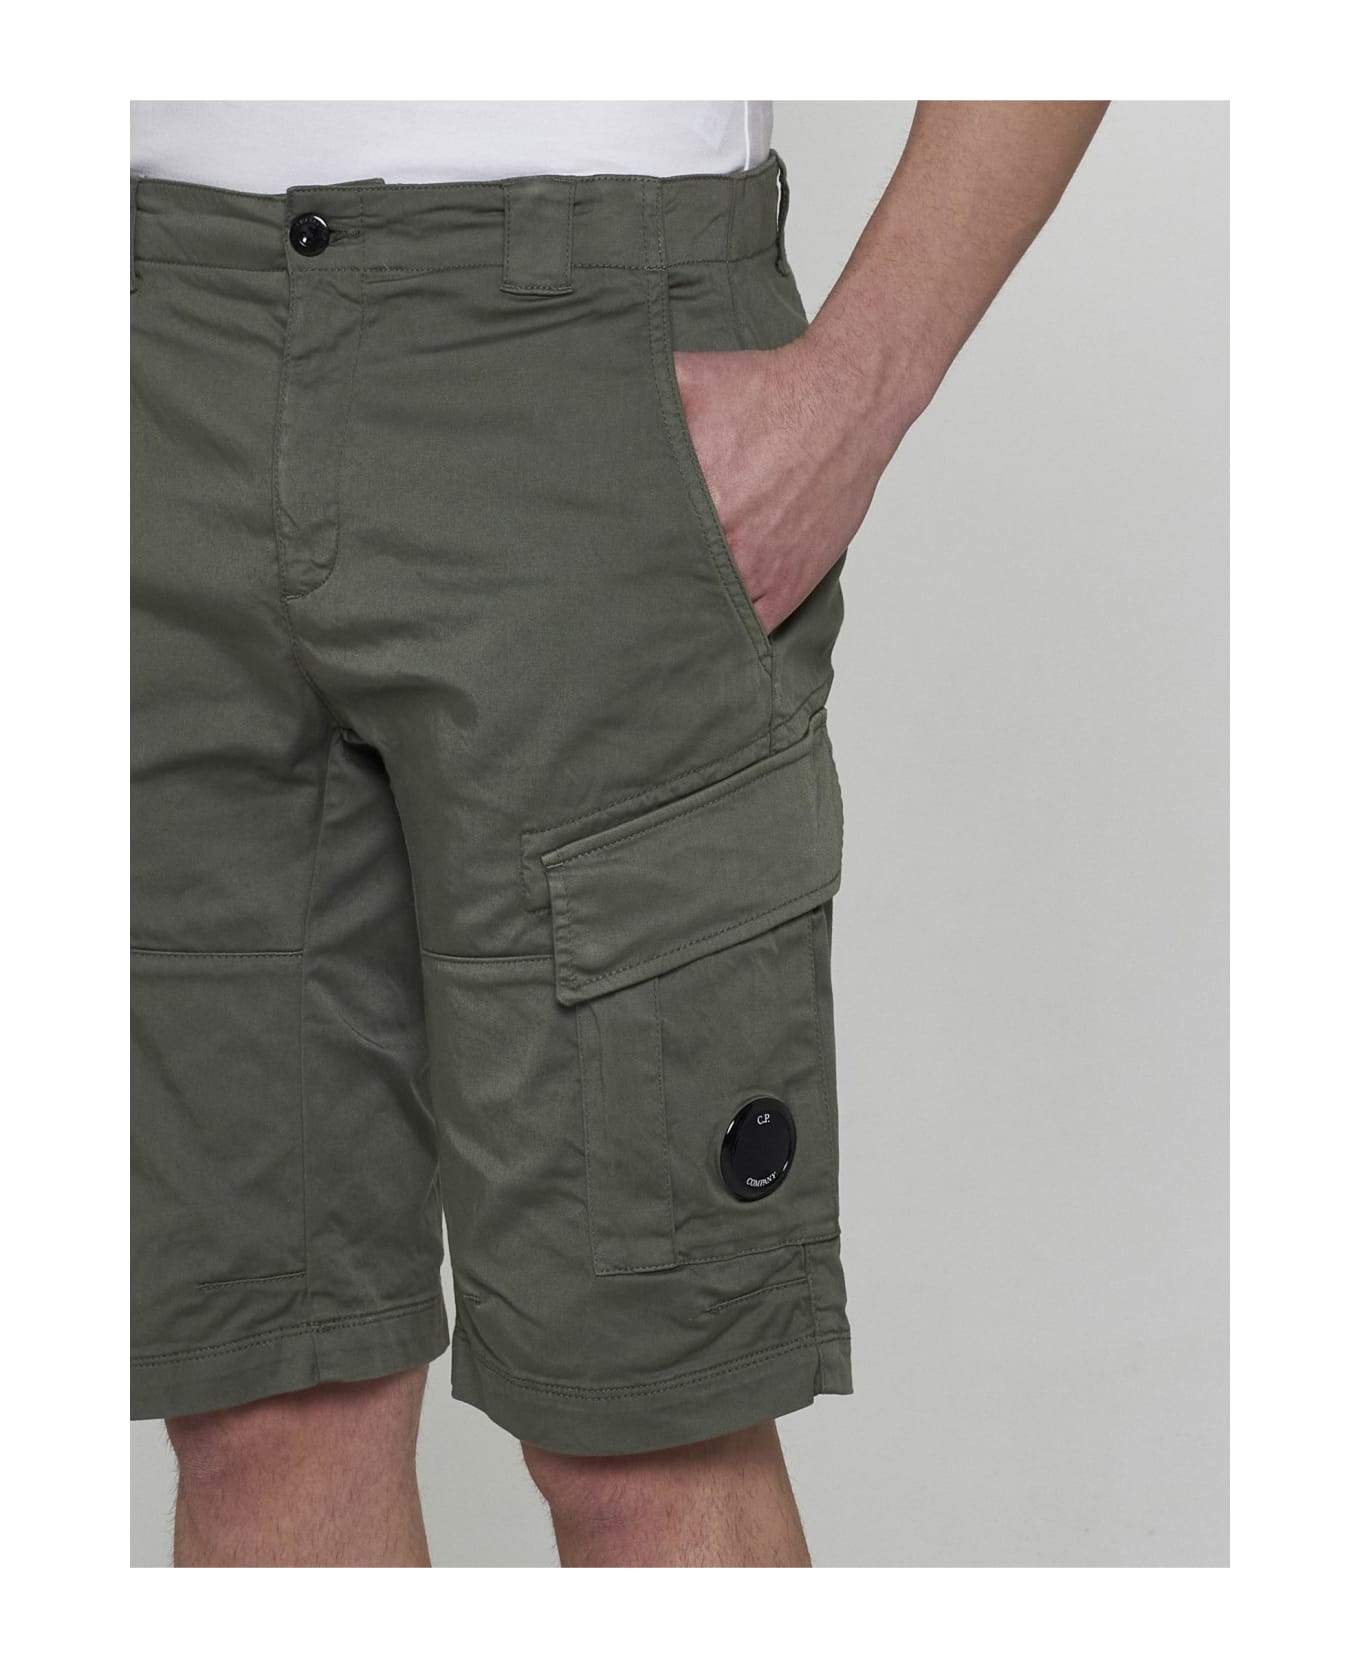 C.P. Company Stretch Cotton Cargo Shorts - Agave Green